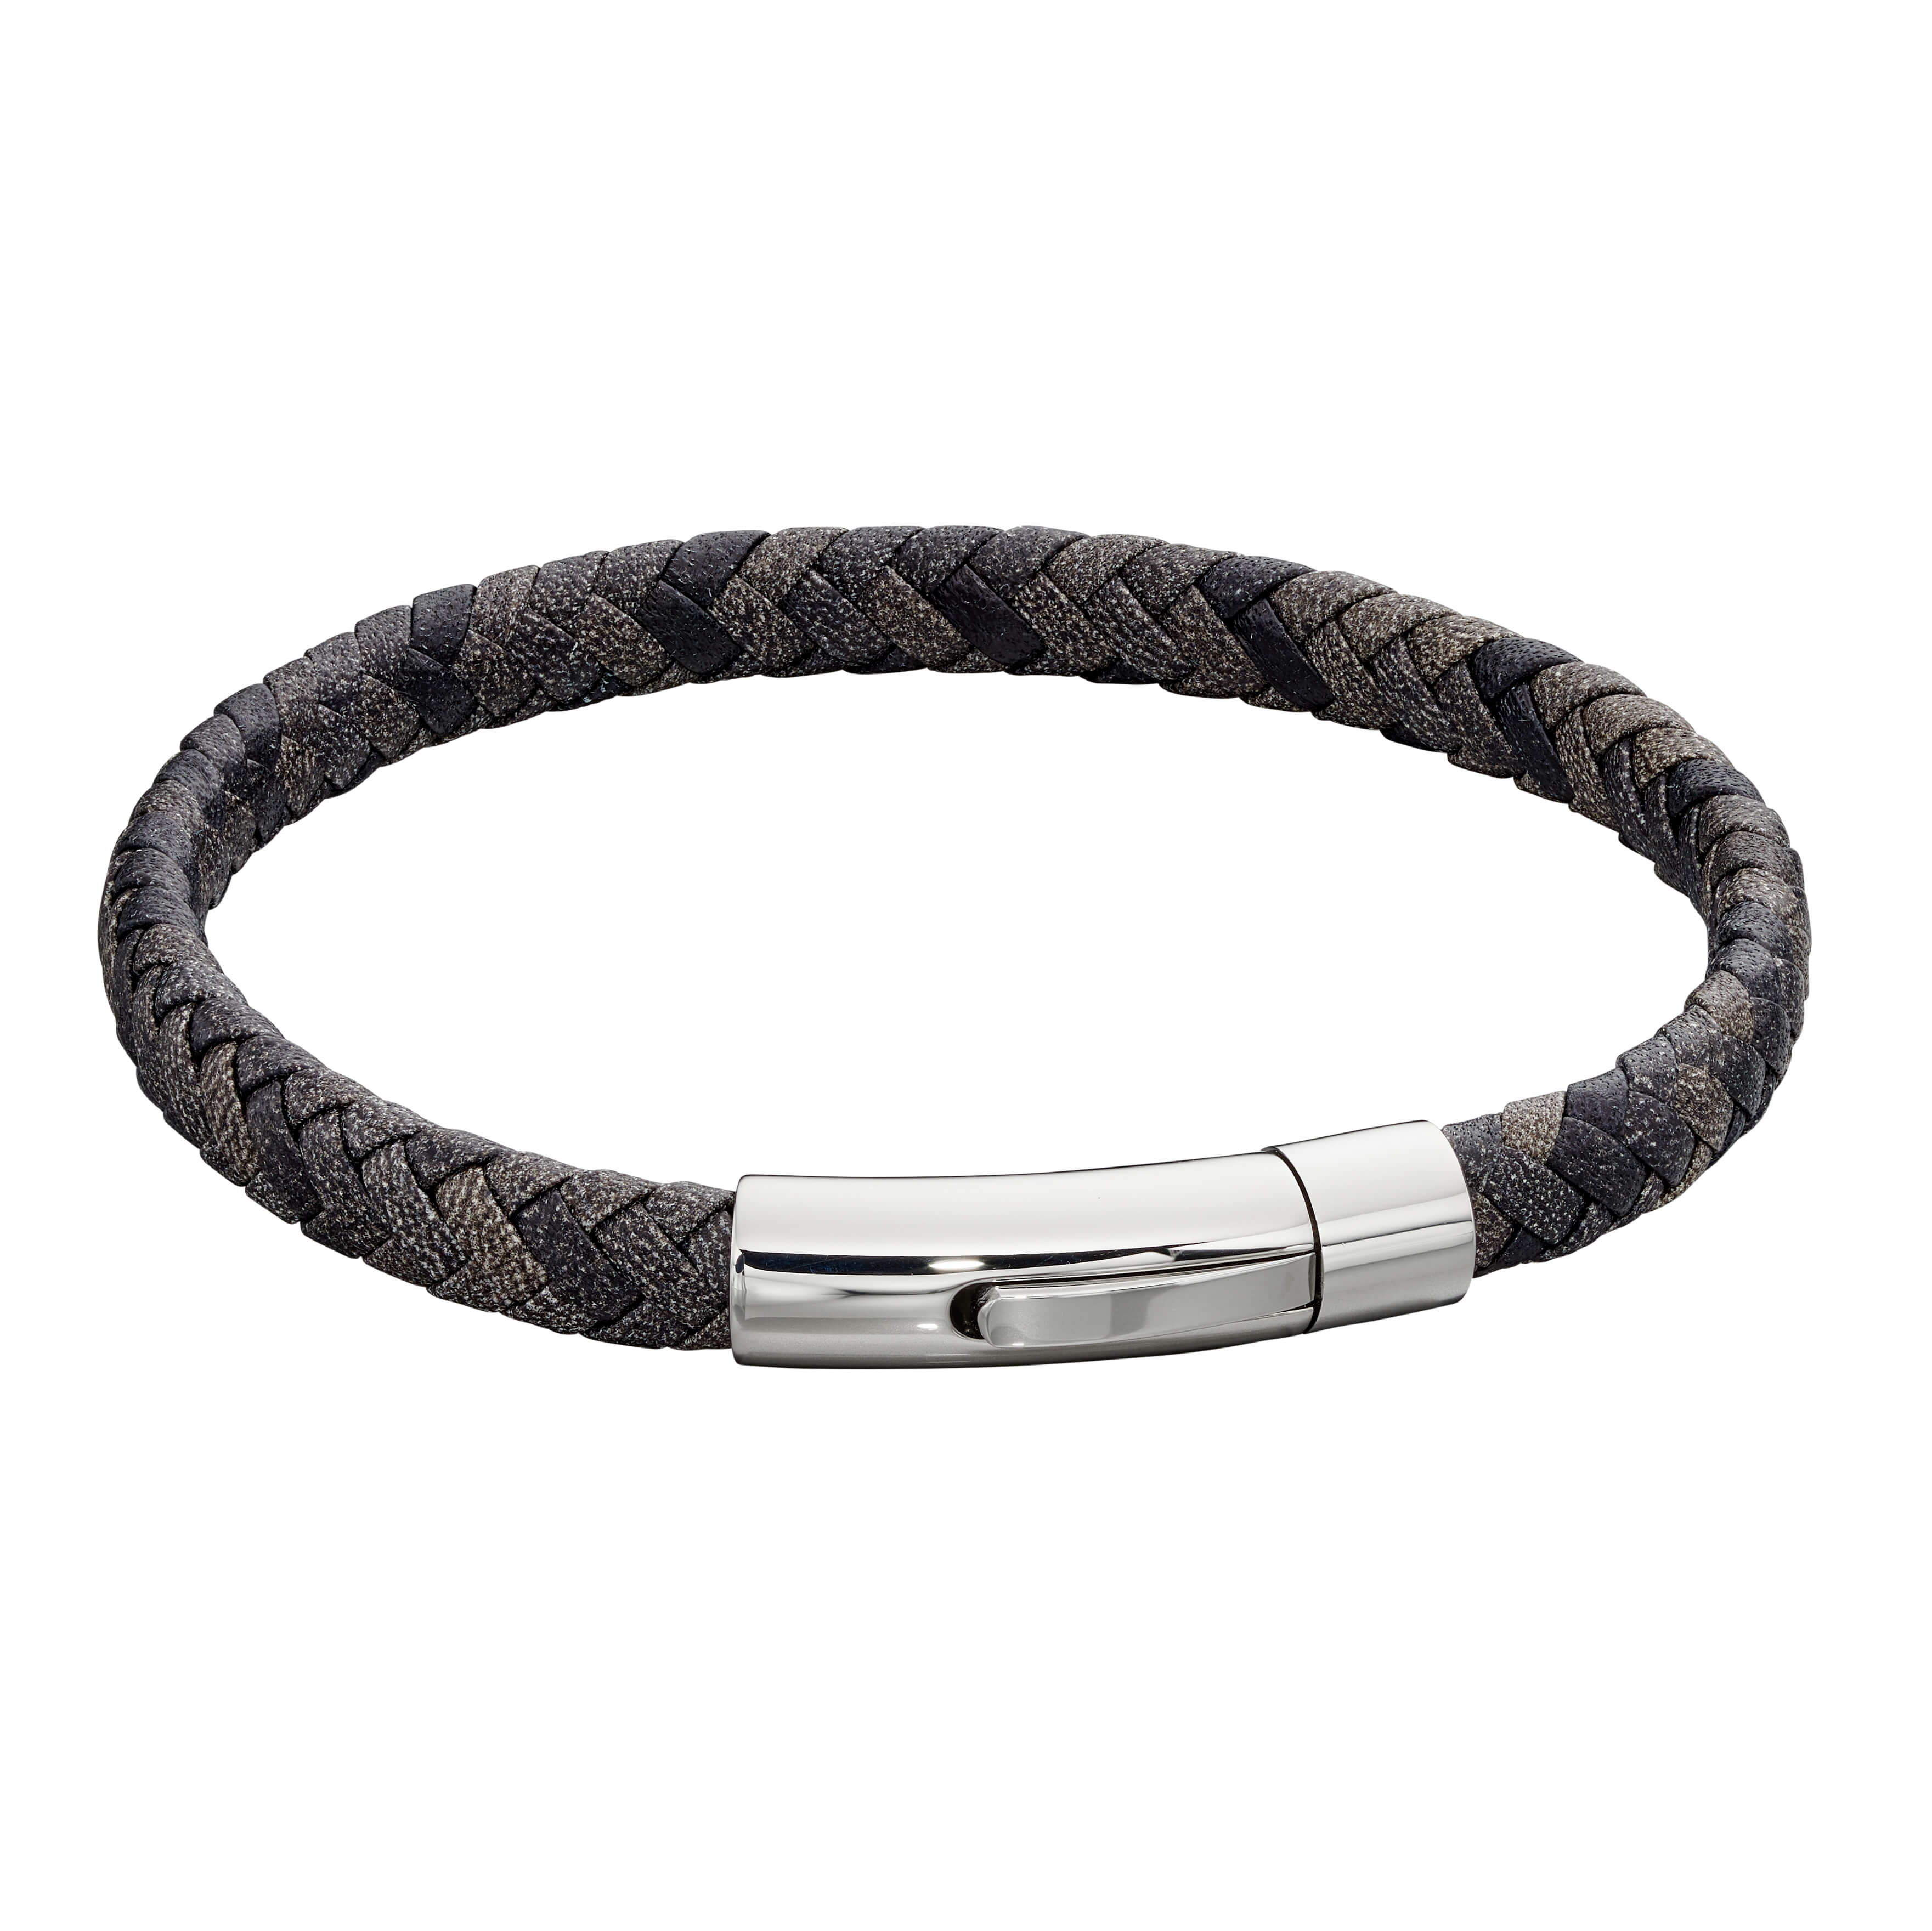 Stainless Steel & Grey Woven Leather Bracelet - FB0002 - Hallmark Jewellers Formby & The Jewellers Bench Widnes